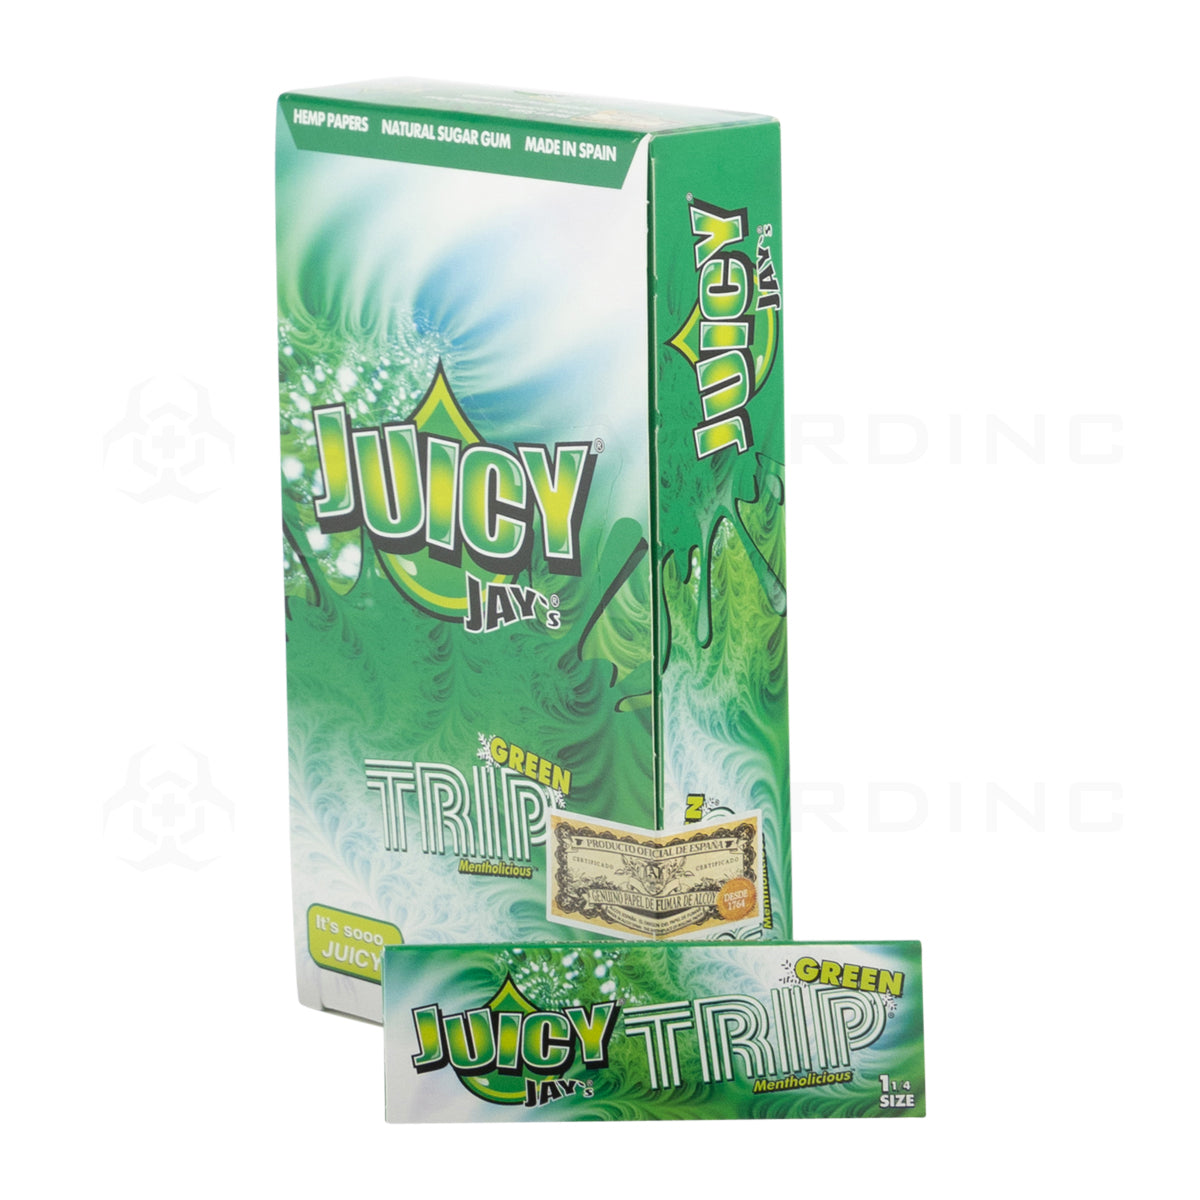 Juicy Jay's® | Wholesale Flavored Rolling Papers Classic 1¼ Size | 78mm - Various Flavors - 24 Count Rolling Papers Juicy Jay's Green Trip  